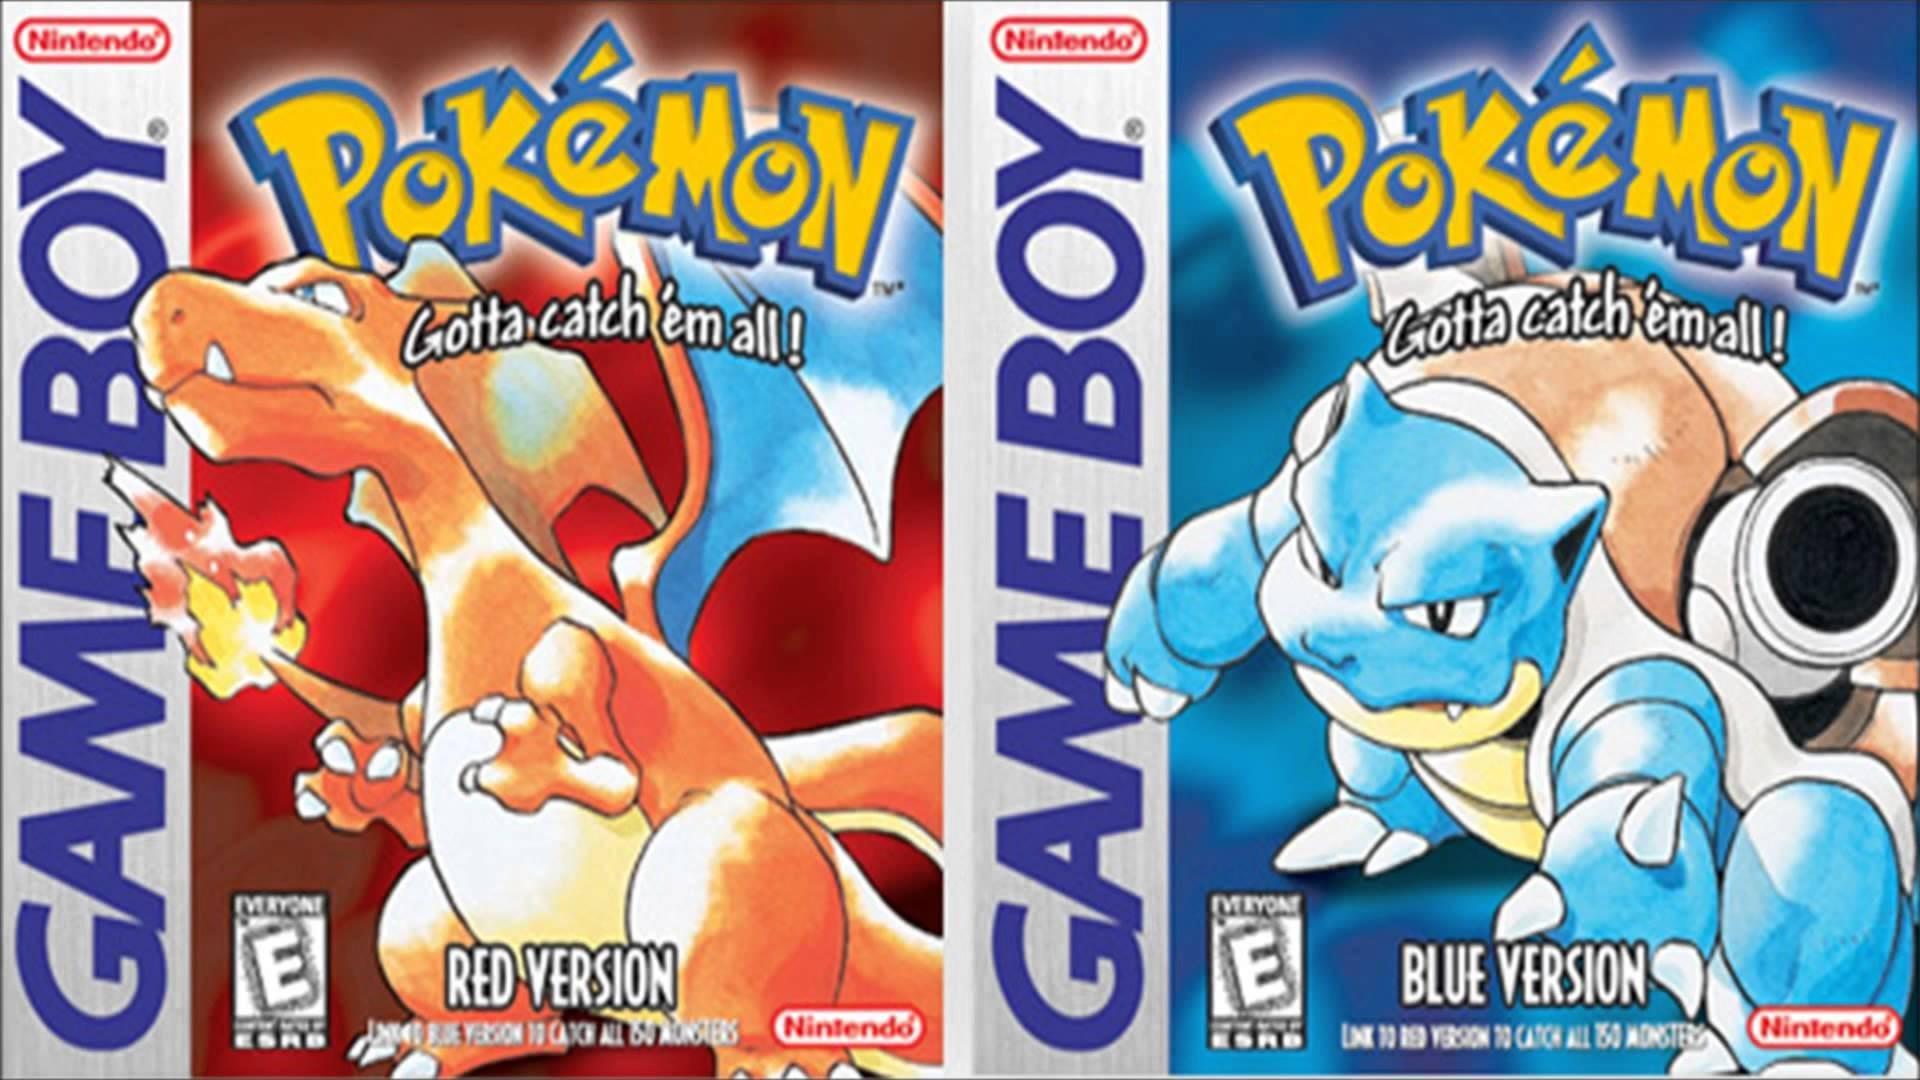 reasons I want to be done with Pokemon Red and Blue